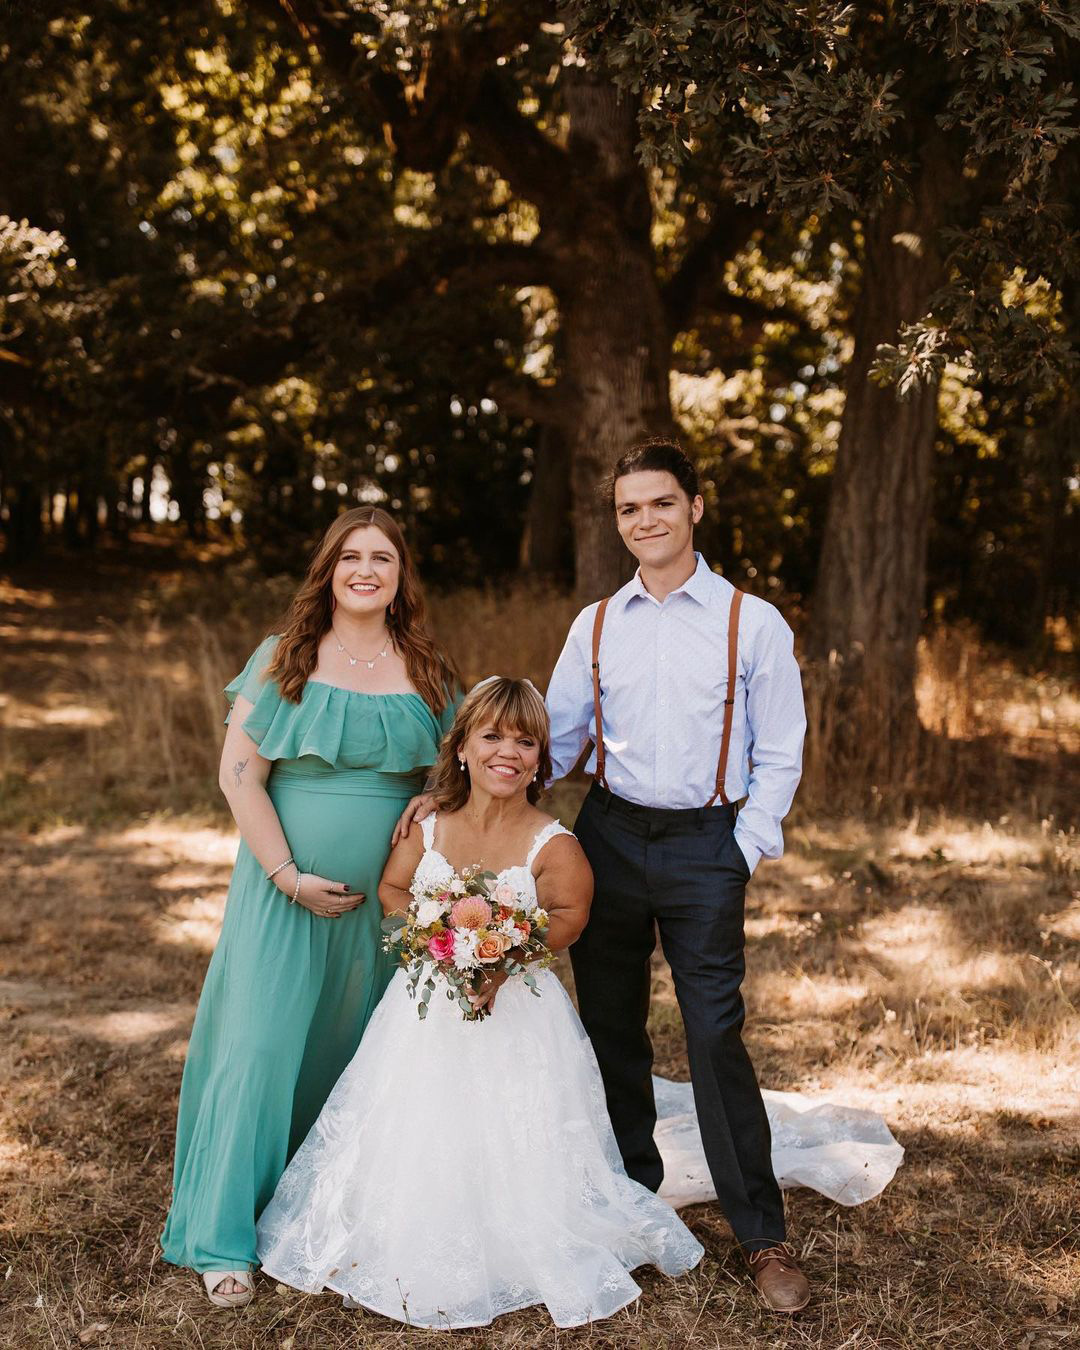 Jacob Roloff And Isabel Roloff Are Molly & Joel Silvius Closest To The Newly Wed?